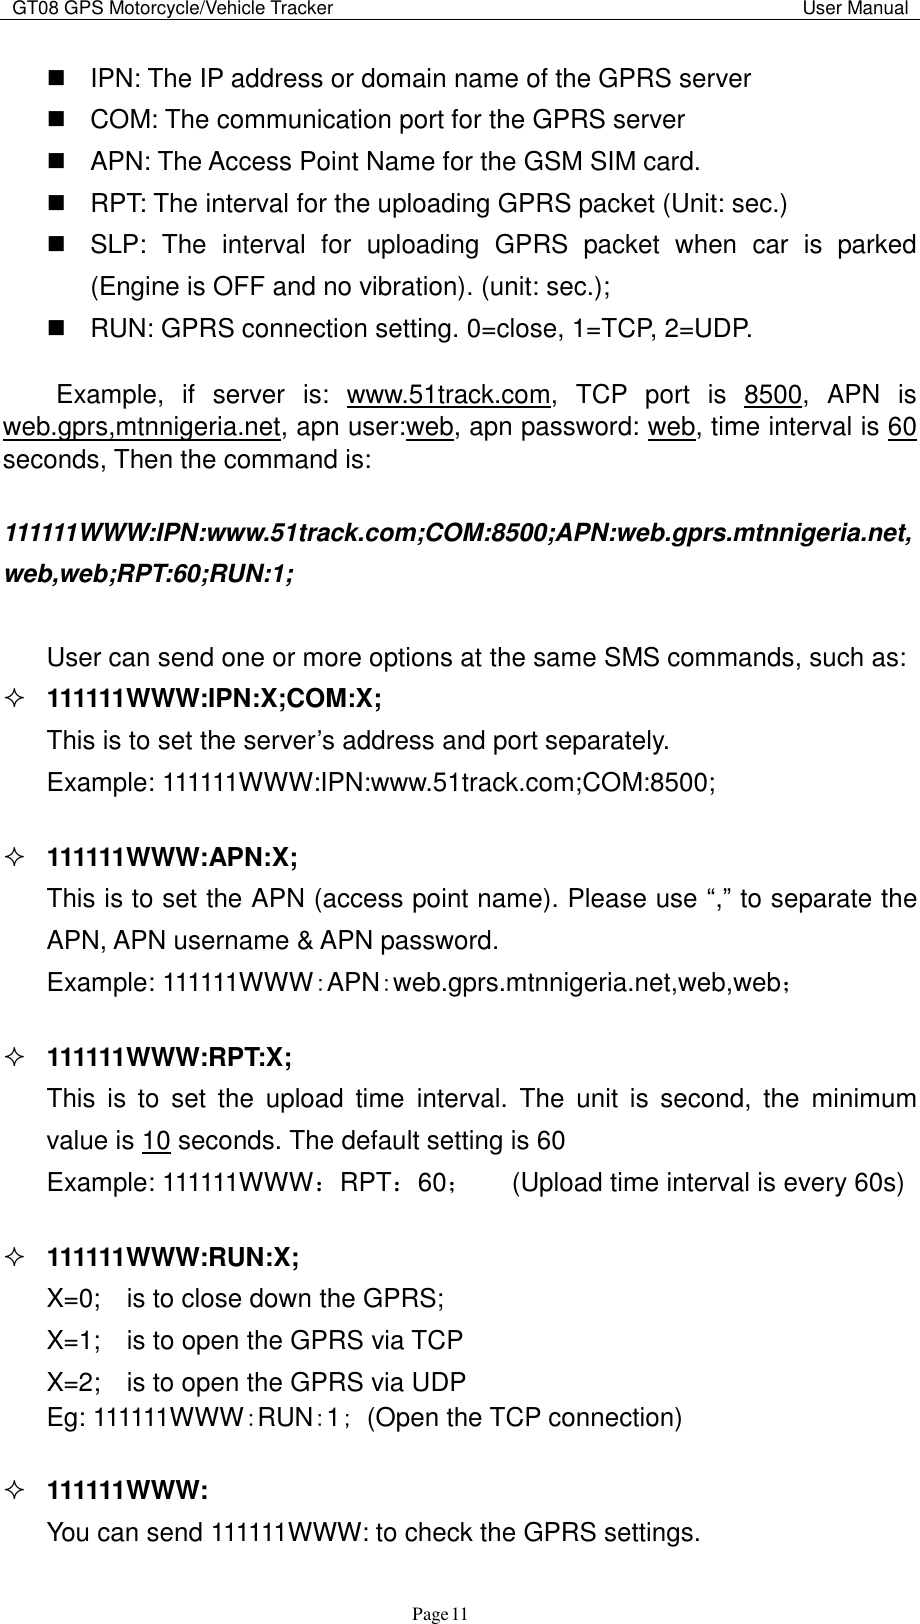 GT08 GPS Motorcycle/Vehicle Tracker                                                                                           User Manual                                     Page   11   IPN: The IP address or domain name of the GPRS server   COM: The communication port for the GPRS server   APN: The Access Point Name for the GSM SIM card.     RPT: The interval for the uploading GPRS packet (Unit: sec.)   SLP:  The  interval  for  uploading  GPRS  packet  when  car  is  parked (Engine is OFF and no vibration). (unit: sec.);   RUN: GPRS connection setting. 0=close, 1=TCP, 2=UDP.    Example,  if  server  is:  www.51track.com,  TCP  port  is  8500,  APN  is web.gprs,mtnnigeria.net, apn user:web, apn password: web, time interval is 60 seconds, Then the command is:  111111WWW:IPN:www.51track.com;COM:8500;APN:web.gprs.mtnnigeria.net,web,web;RPT:60;RUN:1;    User can send one or more options at the same SMS commands, such as:  111111WWW:IPN:X;COM:X;   This is to set the server‟s address and port separately.   Example: 111111WWW:IPN:www.51track.com;COM:8500;     111111WWW:APN:X;   This is to set the APN (access point name). Please use “,” to separate the   APN, APN username &amp; APN password.     Example: 111111WWW：APN：web.gprs.mtnnigeria.net,web,web；   111111WWW:RPT:X;   This  is  to  set  the  upload  time  interval.  The  unit  is  second,  the  minimum   value is 10 seconds. The default setting is 60   Example: 111111WWW：RPT：60；   (Upload time interval is every 60s)   111111WWW:RUN:X; X=0;    is to close down the GPRS;   X=1;    is to open the GPRS via TCP X=2;    is to open the GPRS via UDP Eg: 111111WWW：RUN：1； (Open the TCP connection)   111111WWW: You can send 111111WWW: to check the GPRS settings. 